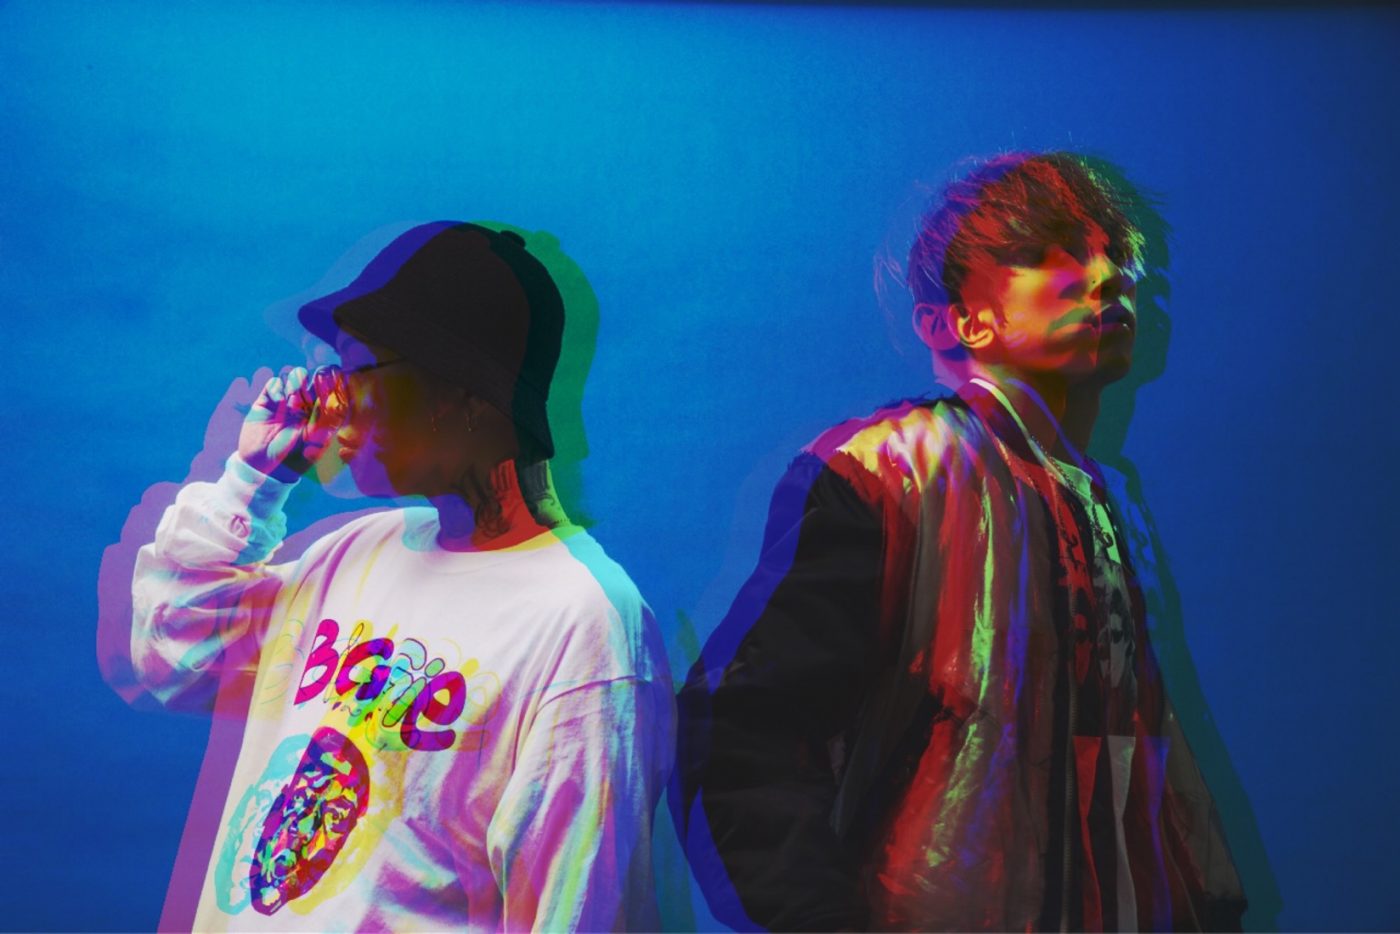 BACK-ON、盟友FLOWとの「NOT ENOUGH feat. FLOW」リリックMVを解禁